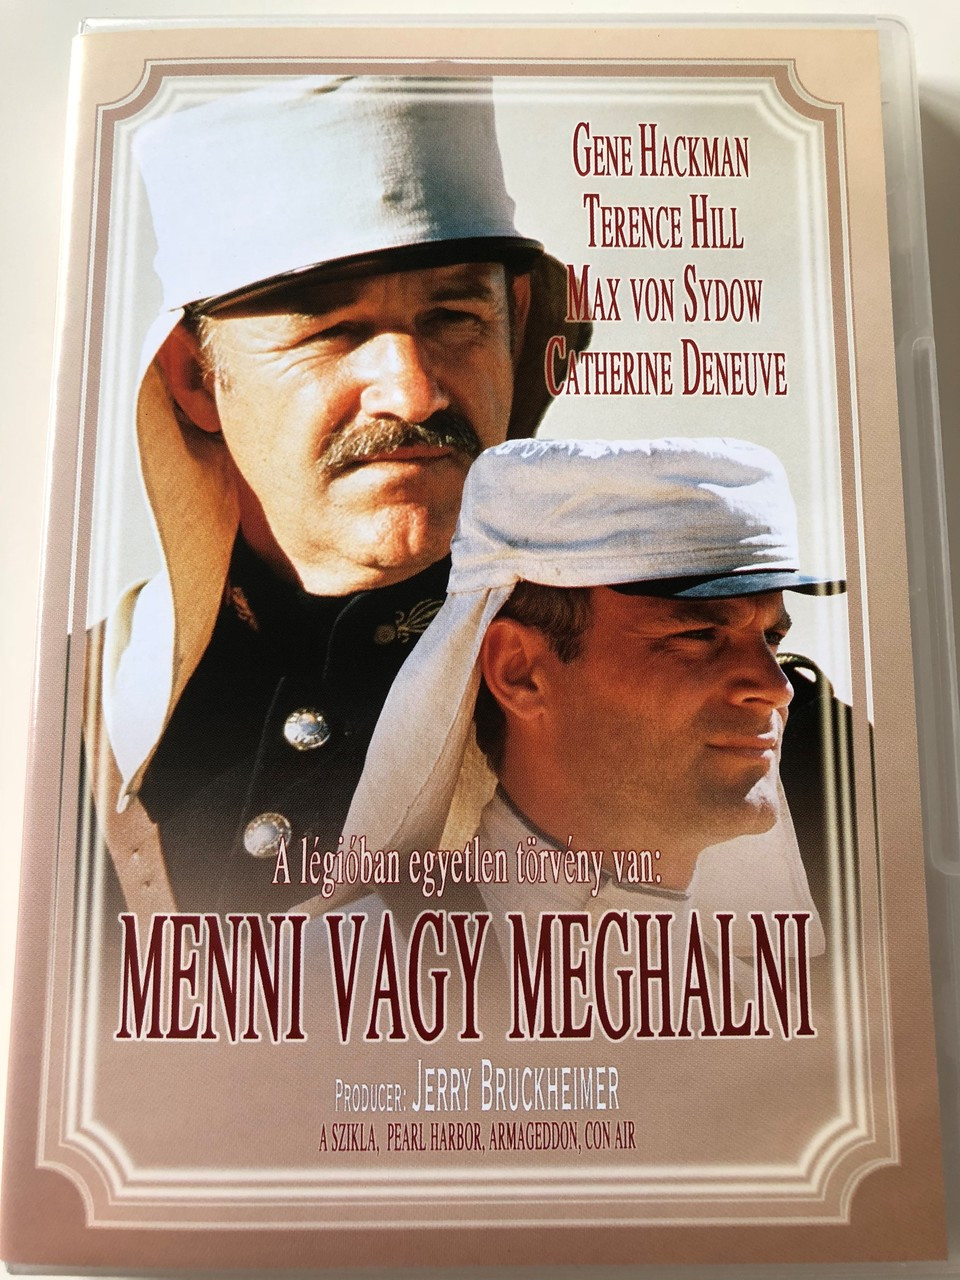 Menni vagy meghalni DVD 1977 March or Die / Audio options: English,  Hungarian / HUNGARIAN SUBTITLES / Starring: Gene Hackman, Terence Hill,  Catherine Deneuve, Max von Sydow and Ian Holm / Directed by Dick Richards -  bibleinmylanguage